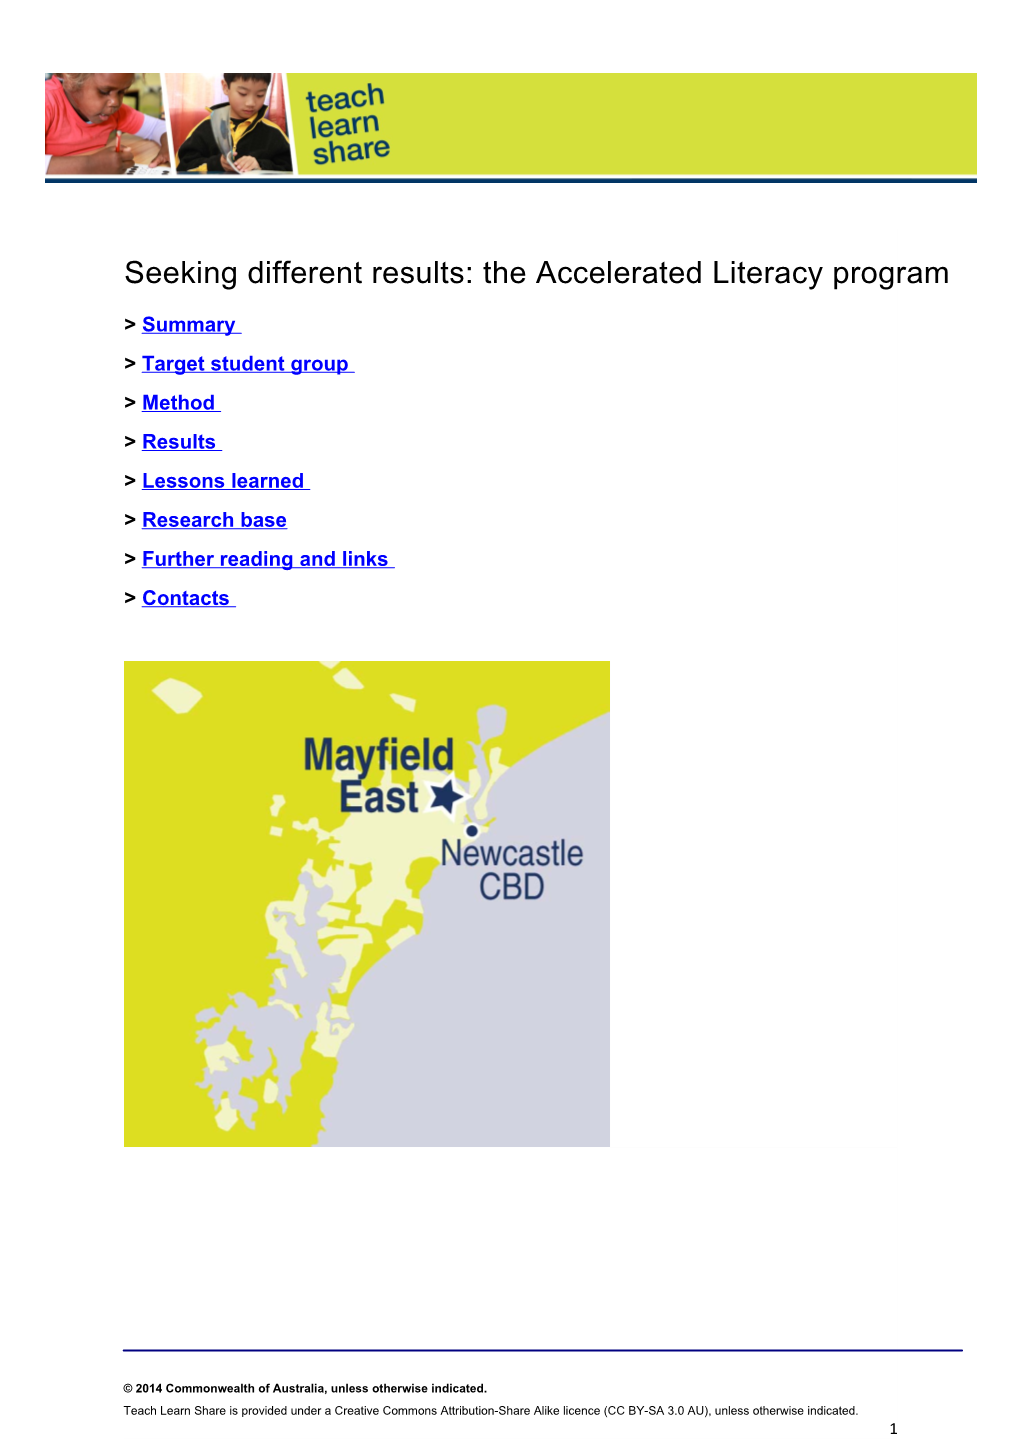 Seeking Different Results: the Accelerated Literacy Program